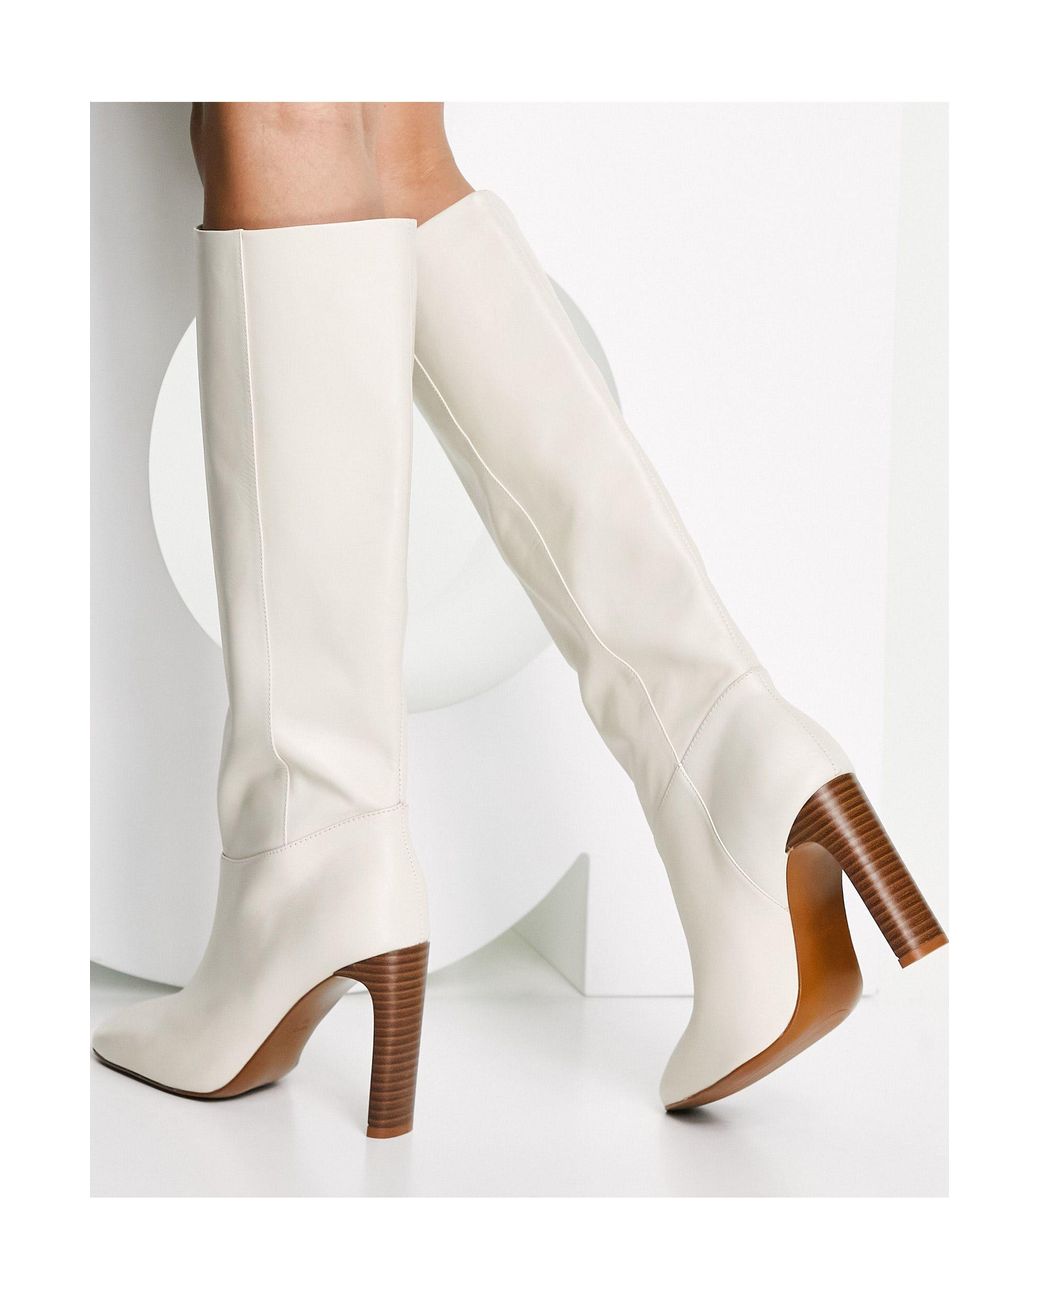 Mango Leather Knee High Heeled Boots in White | Lyst UK